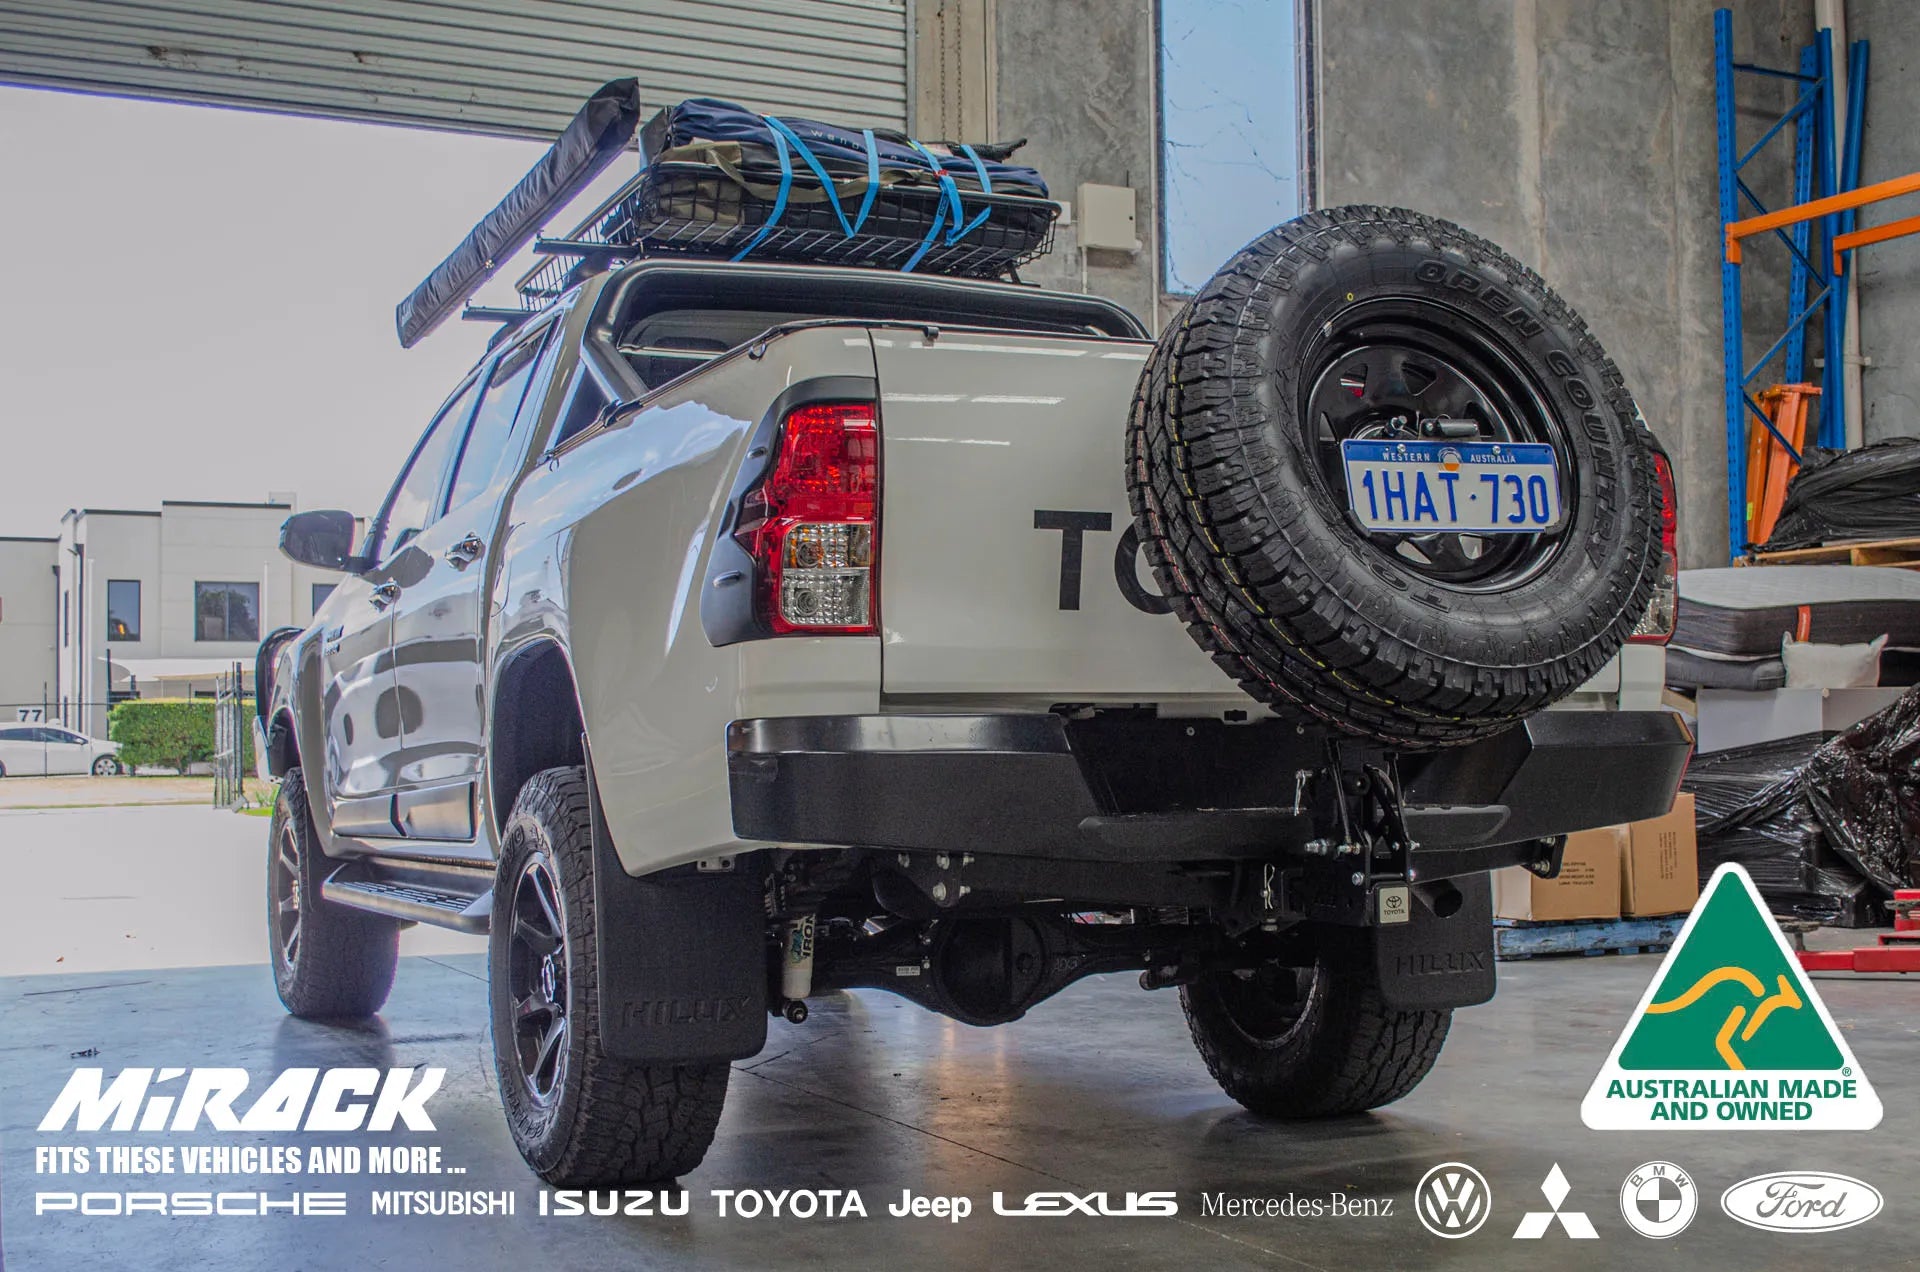 asy rear access & off-road freedom: Toyota Hilux SR5 upgraded with Mirack's tilting spare wheel carrier.